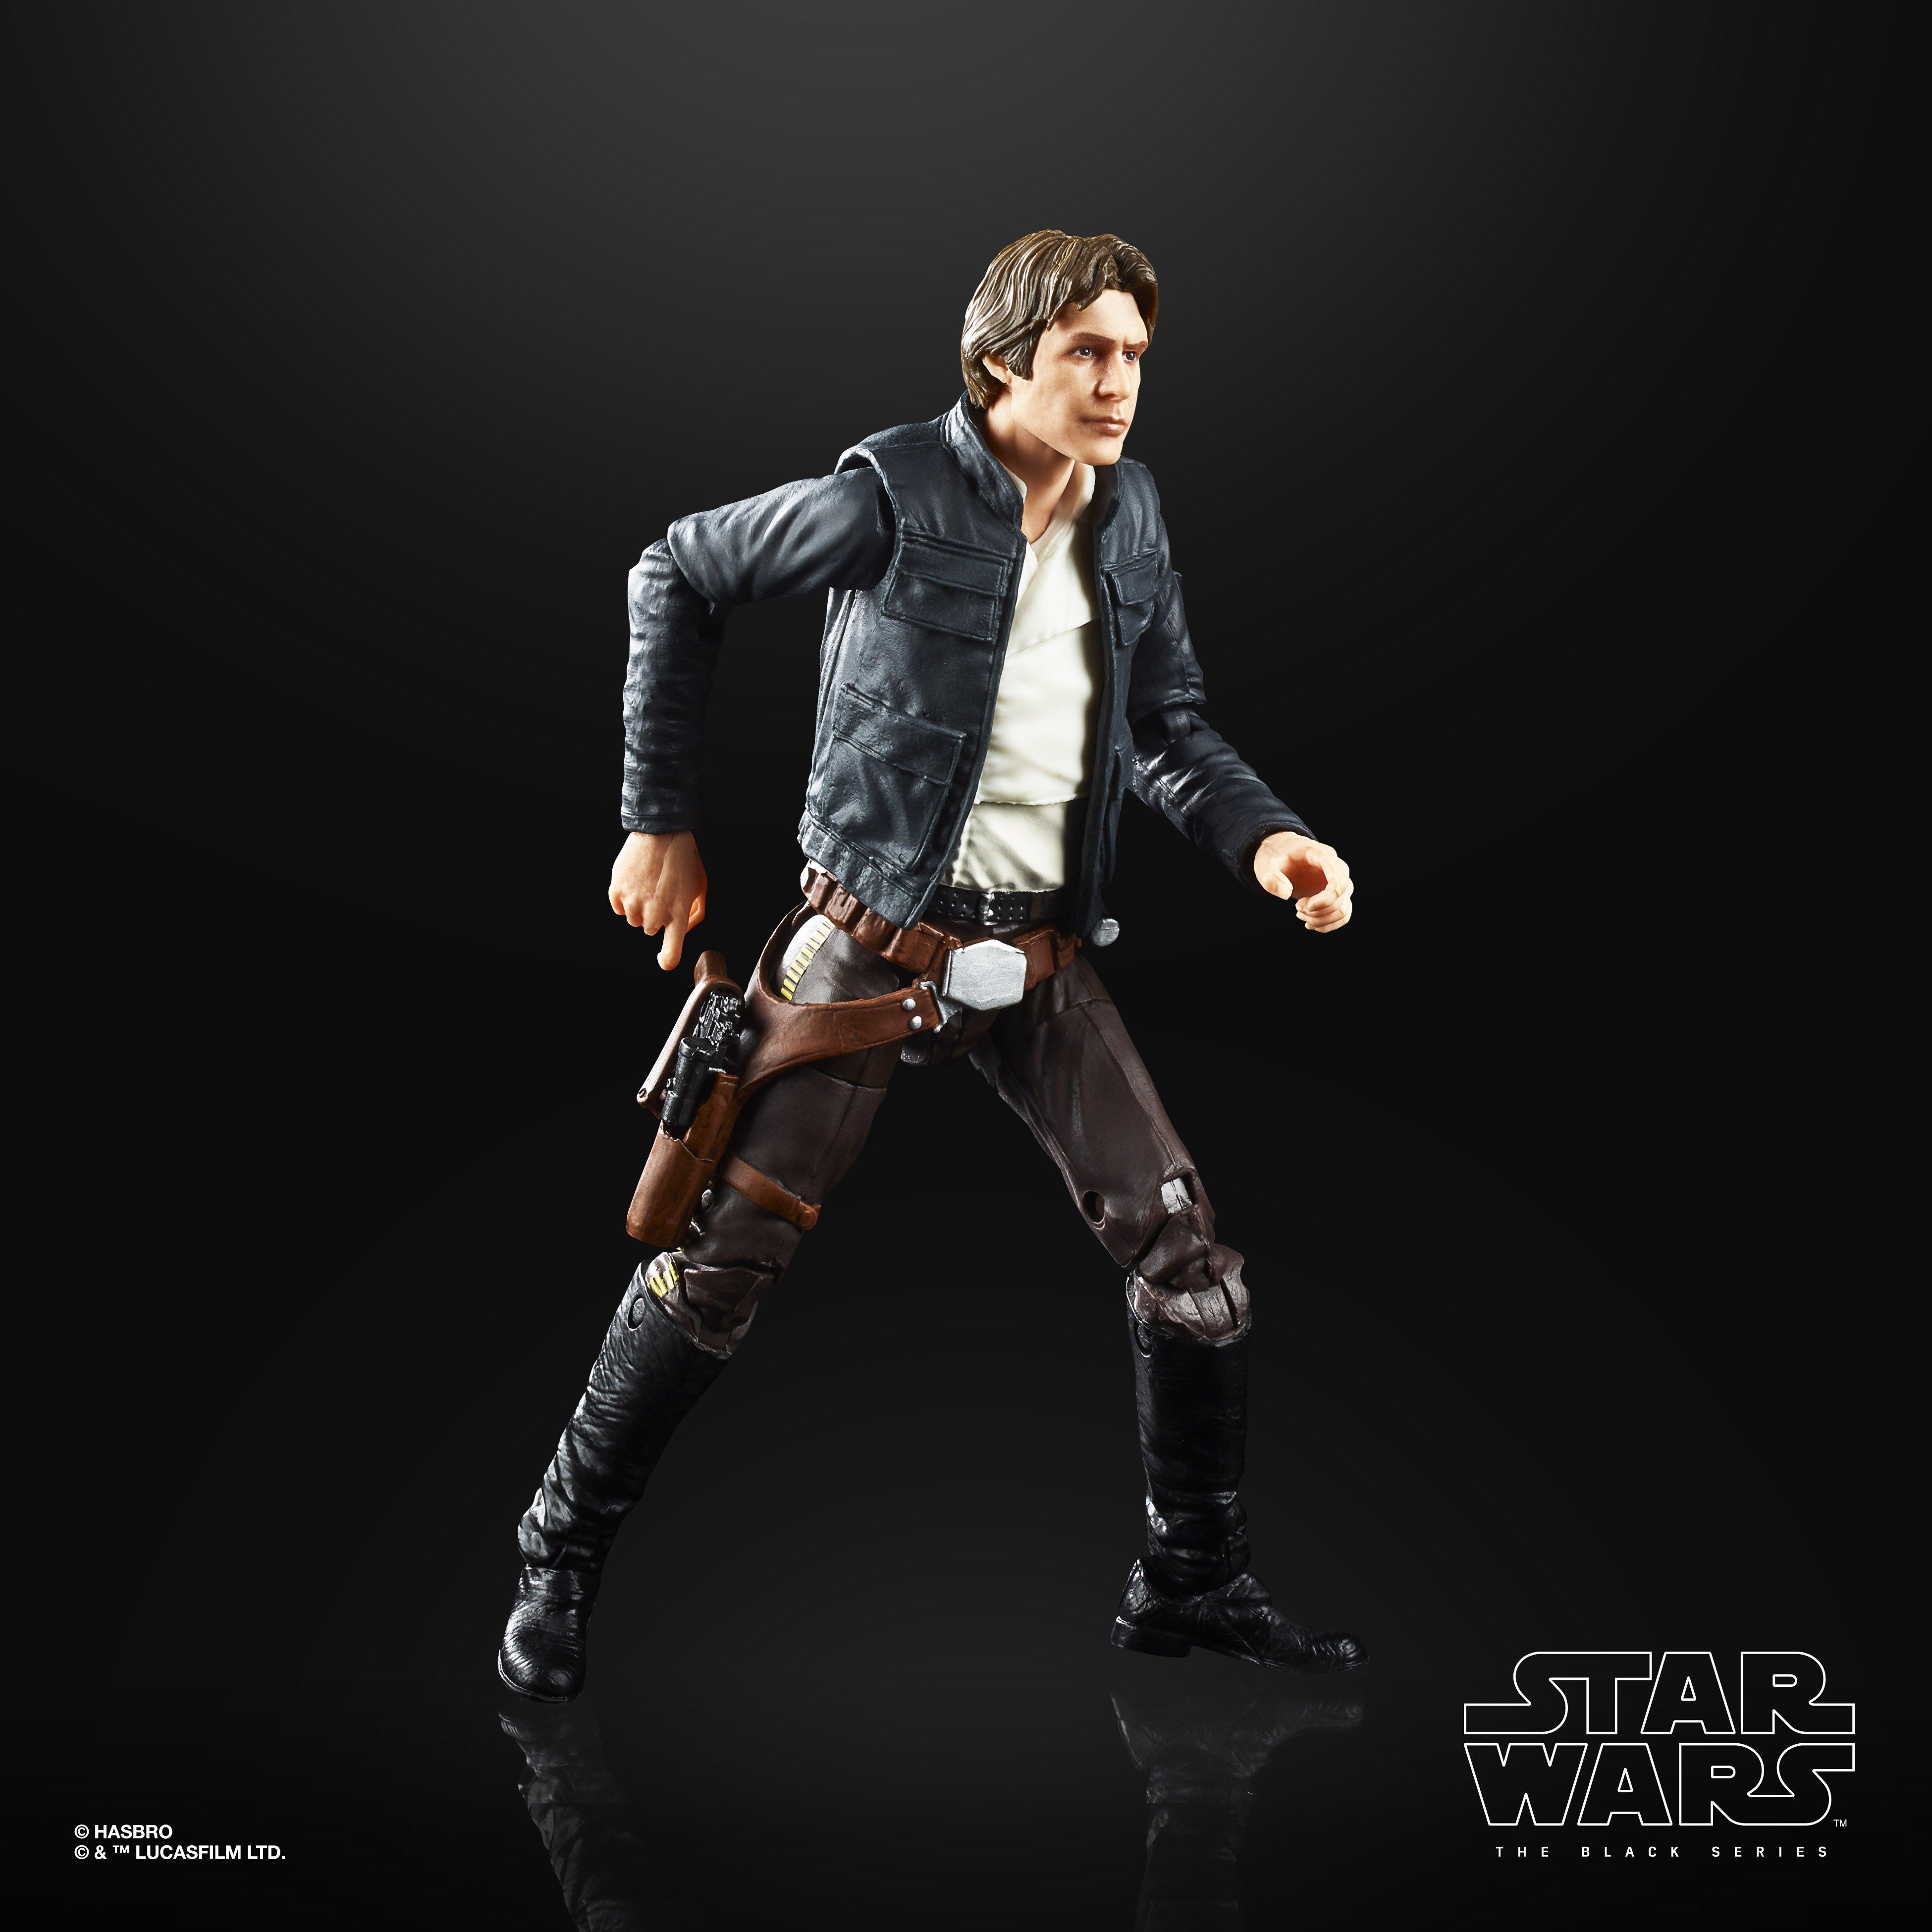 Hasbro Star Wars Episode V: The Empire Strikes Back 40th Anniversary Han Solo Bespin 6-in Action Figure